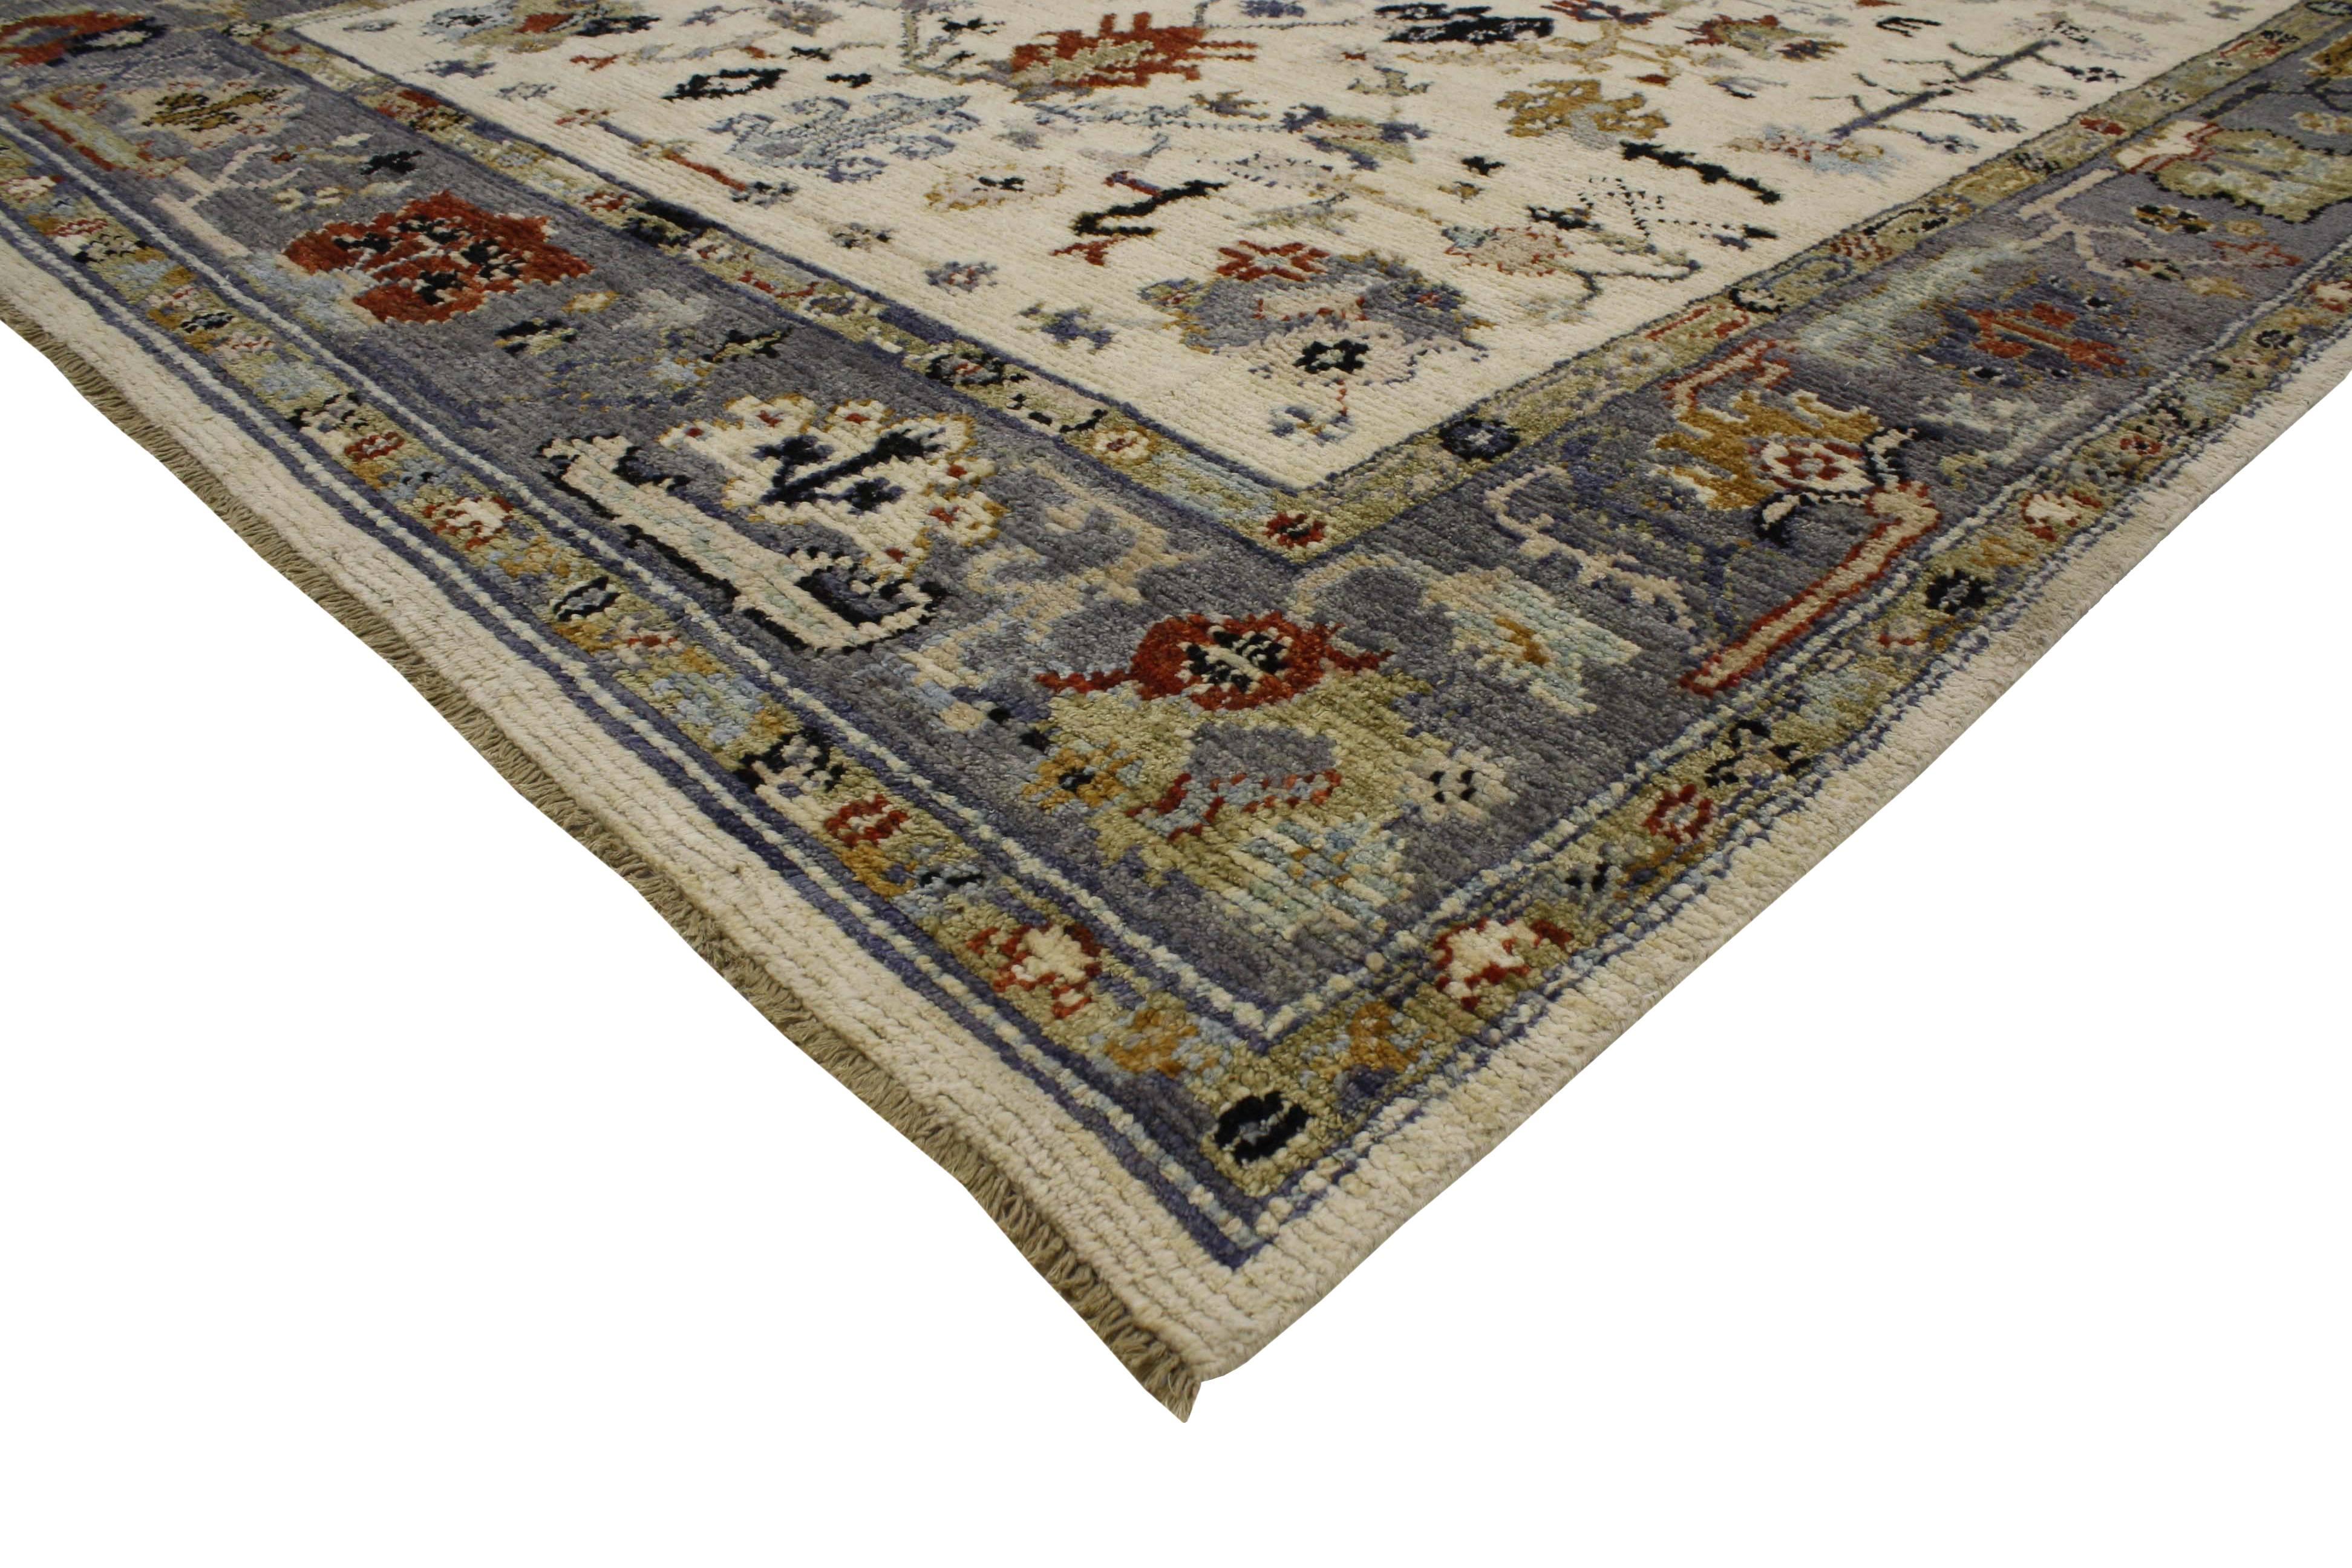 80391 New Contemporary Oushak Area Rug with Transitional Style. Providing elements of wanderlust and functional versatility, this modern Oushak style rug features a cream field with a slate blue border. Classically composed and boasting a truly